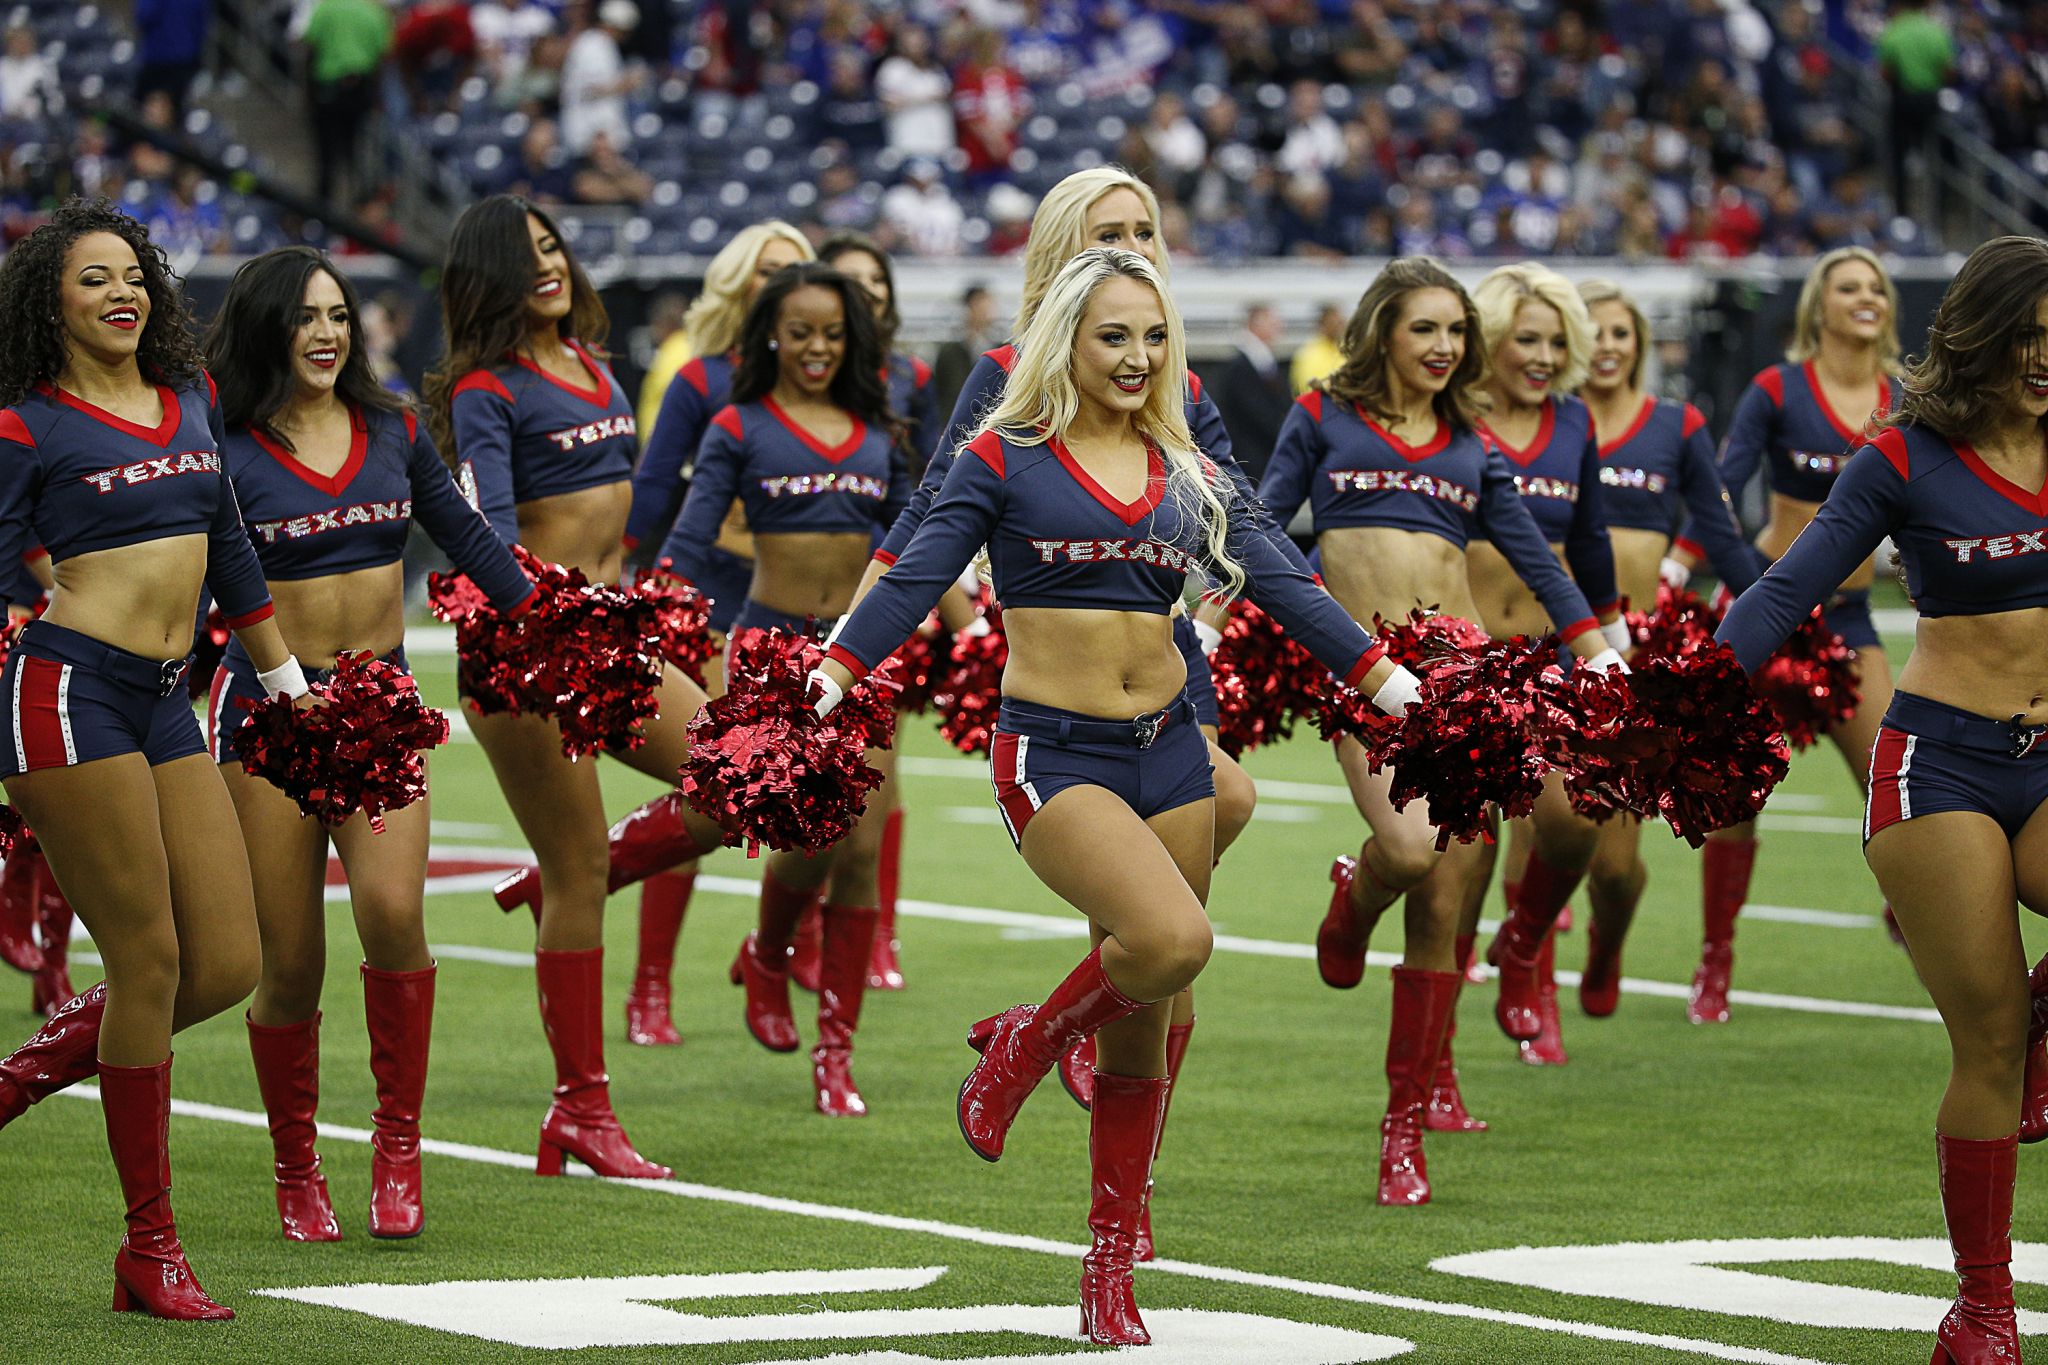 There will be no cheerleaders on the field at NFL games in 2020.